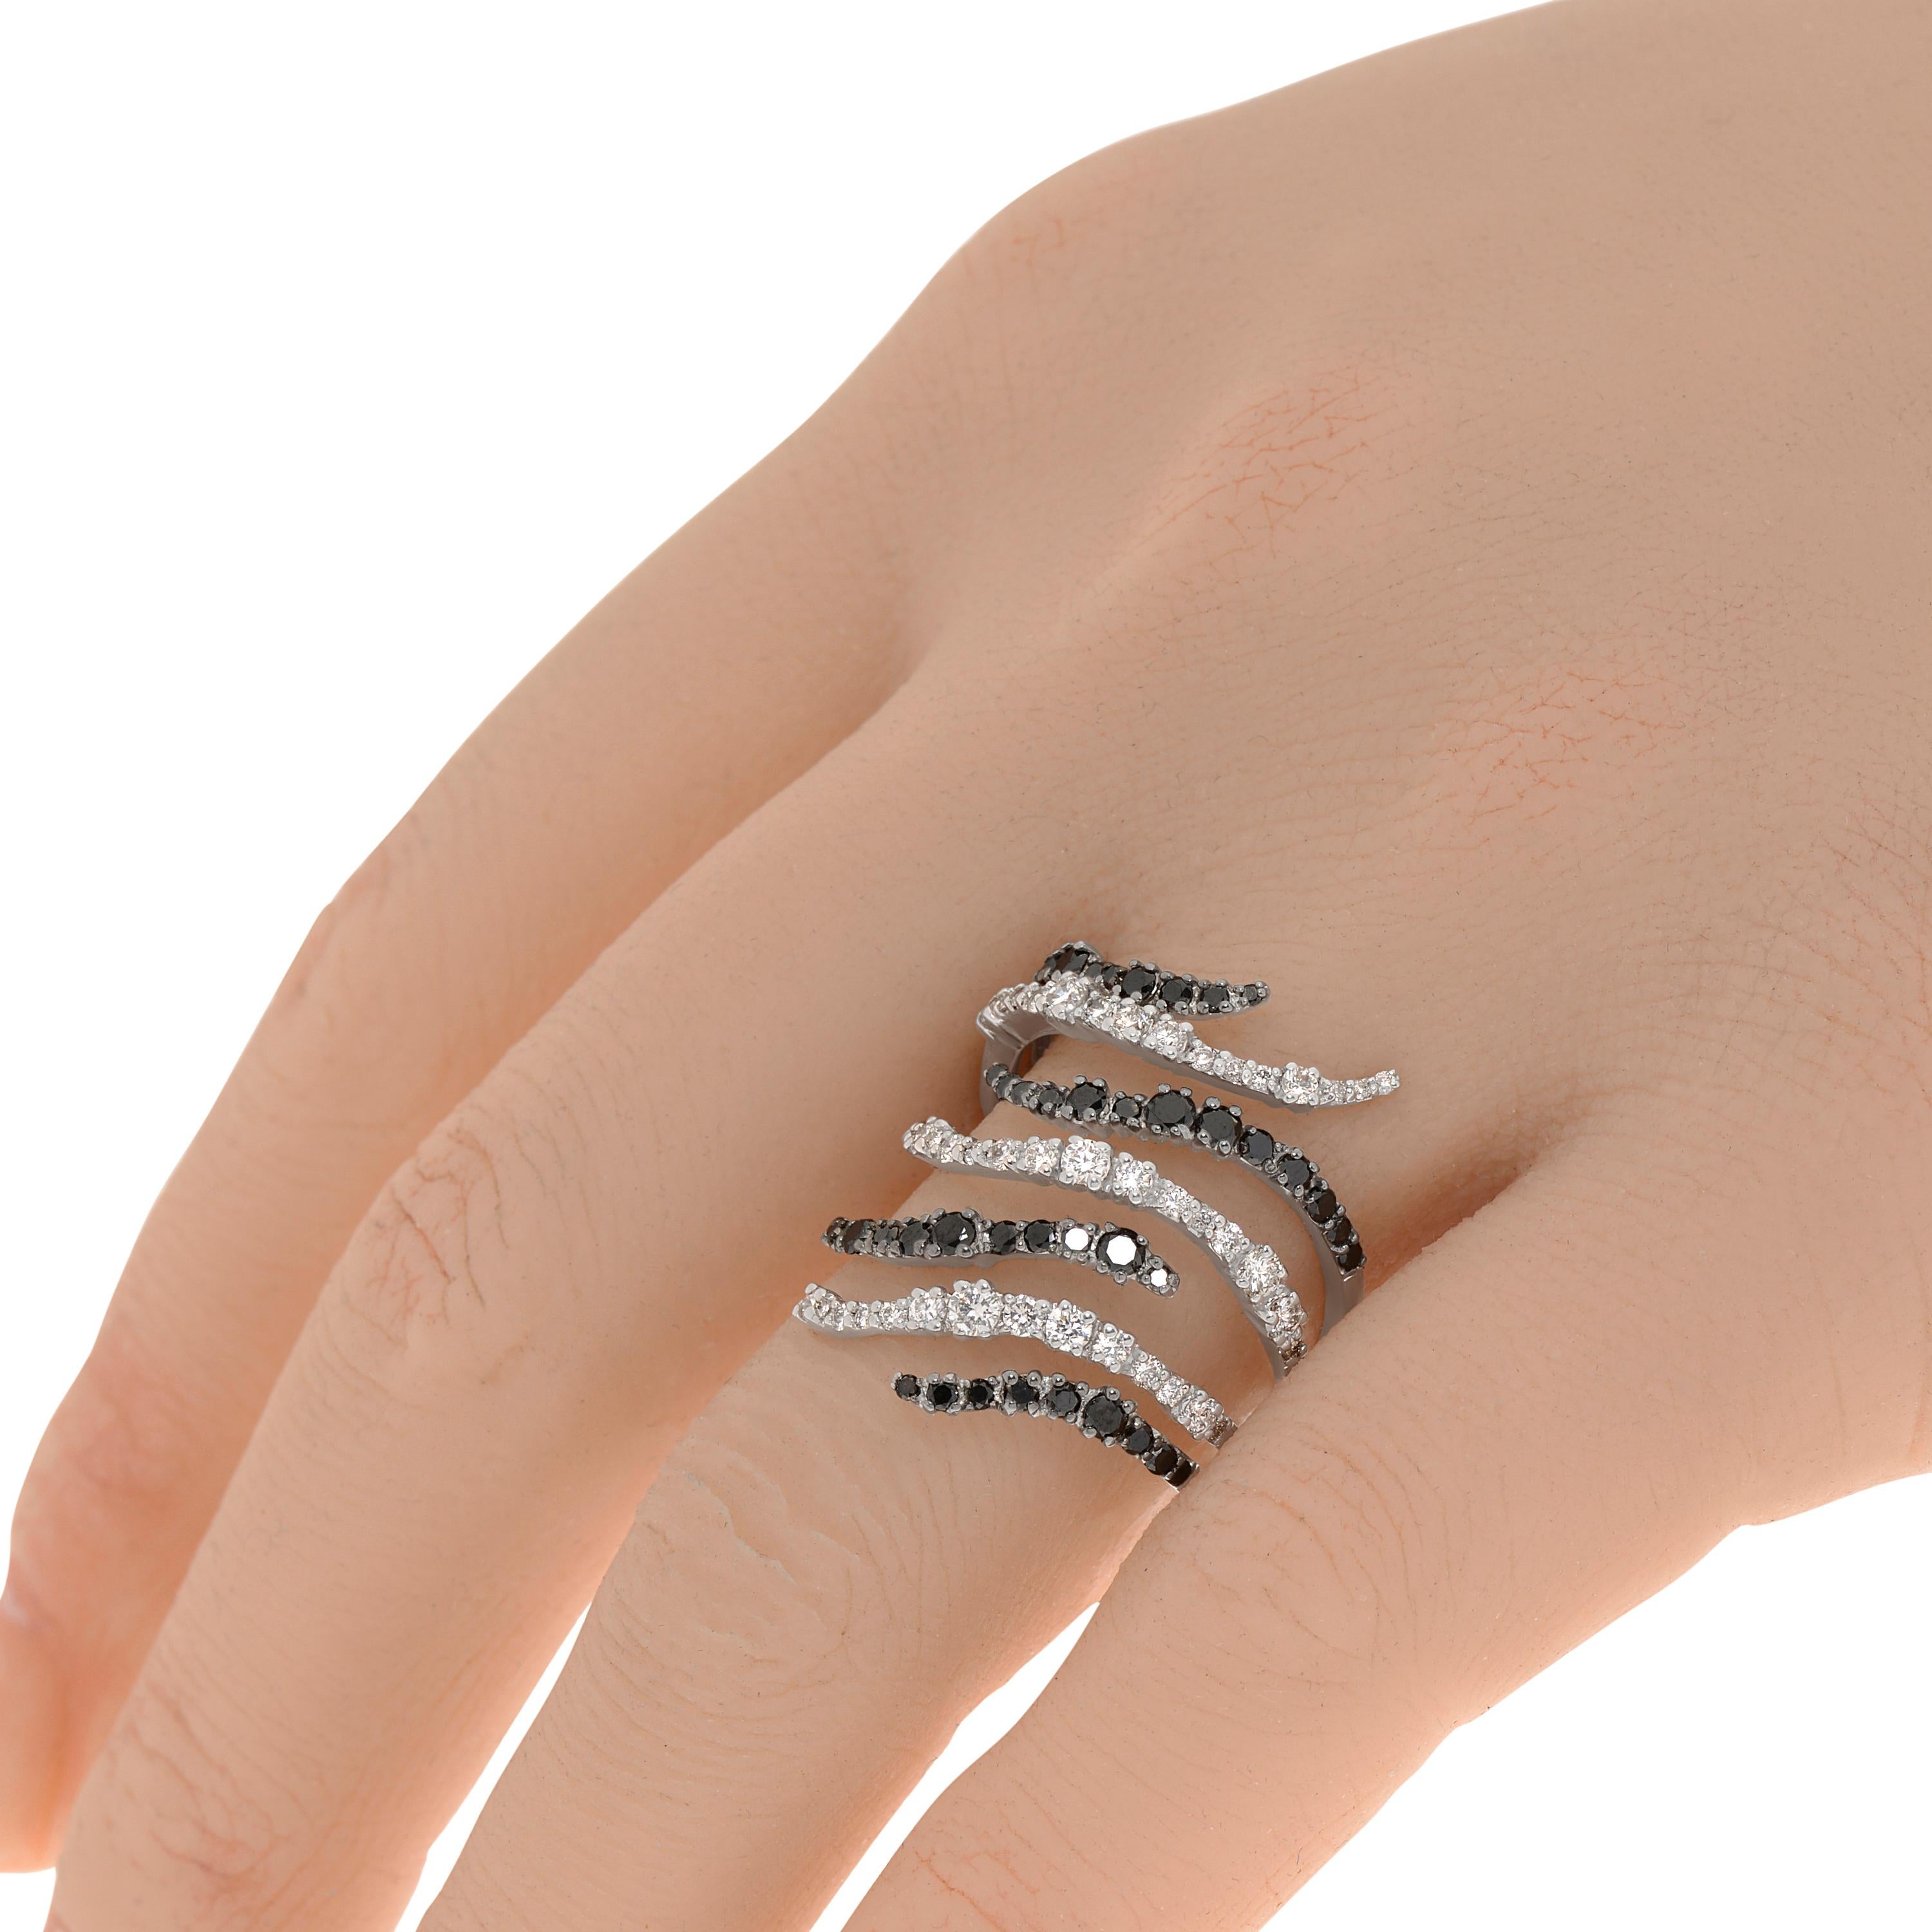 Salvini 18K white gold highway ring features glistening waves of 1.56ct. tw. black and white diamonds. Diamond clarity: VS/SI. Diamond color: G-H. The ring size is 6.5 (53.1). The decoration size is 30mm x 30mm. The weight is 8g.
